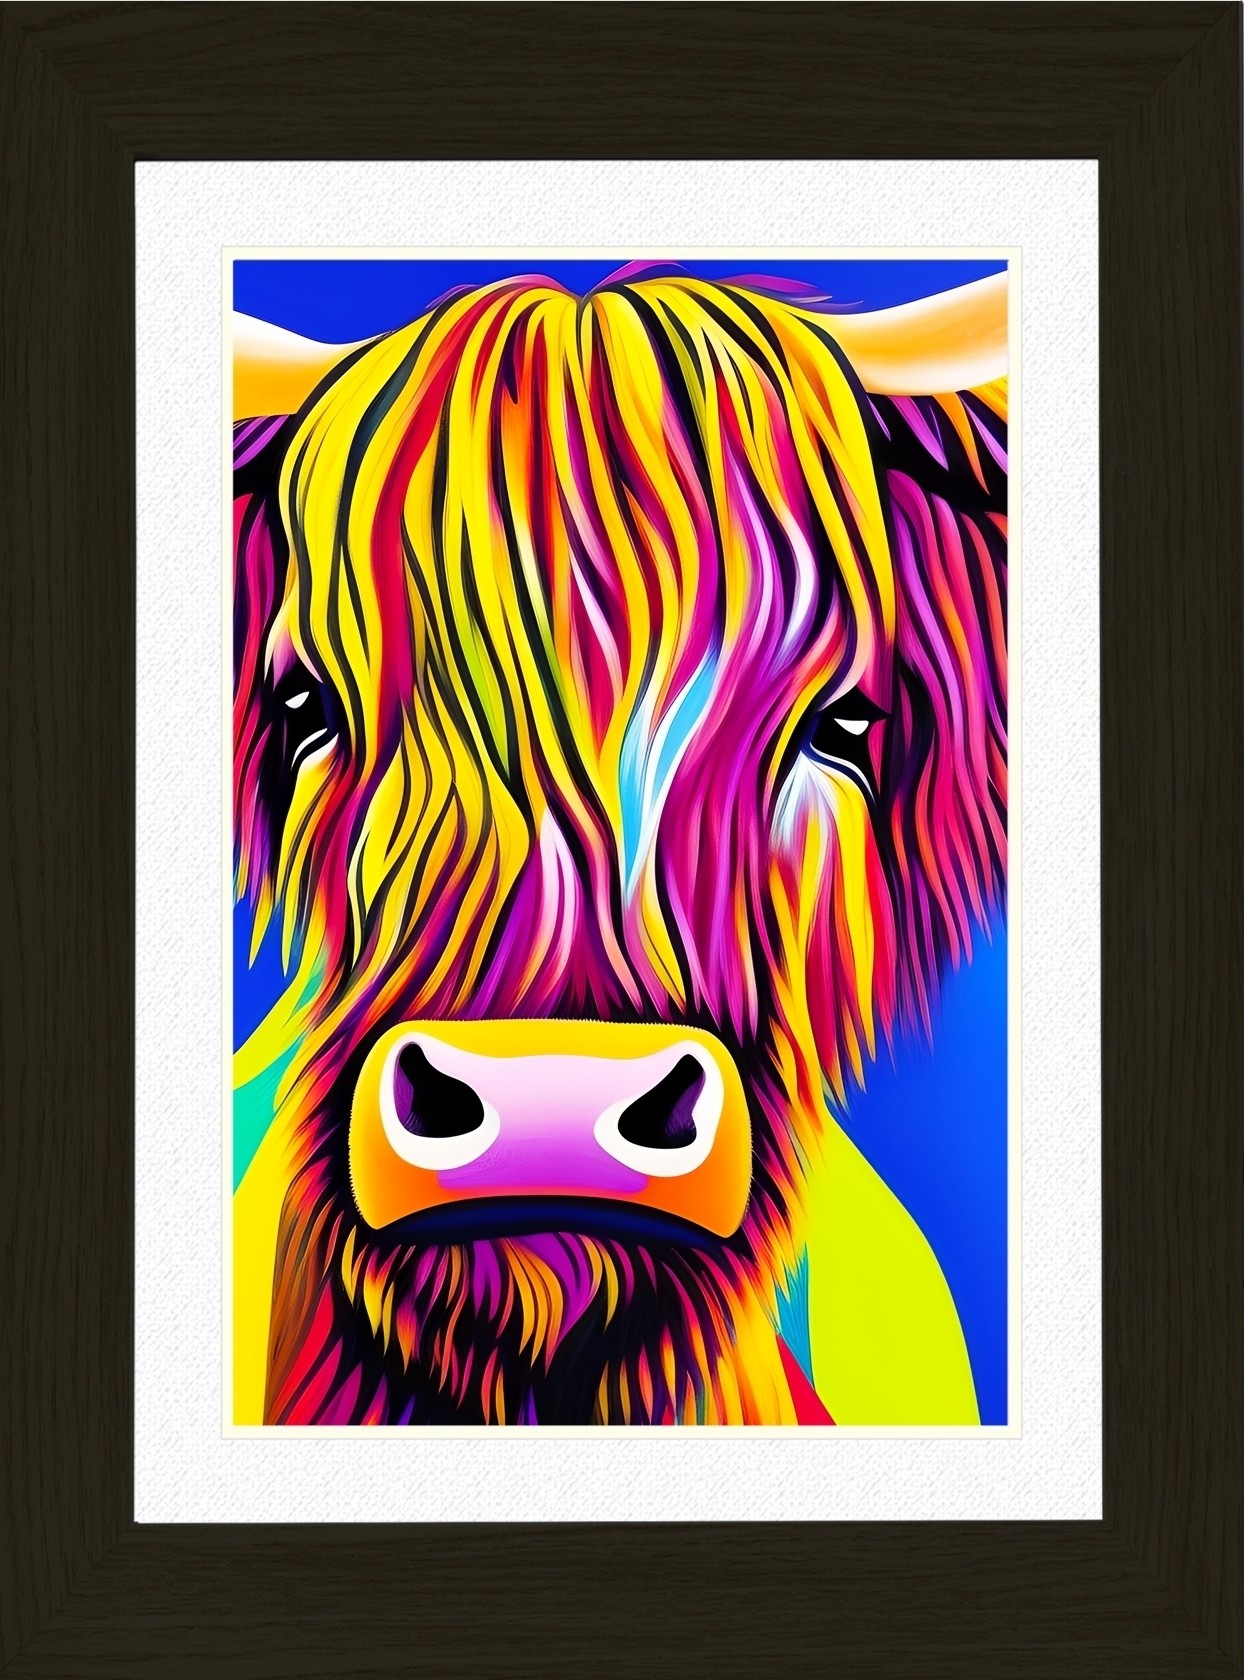 Cow Animal Picture Framed Colourful Abstract Art (30cm x 25cm Black Frame)